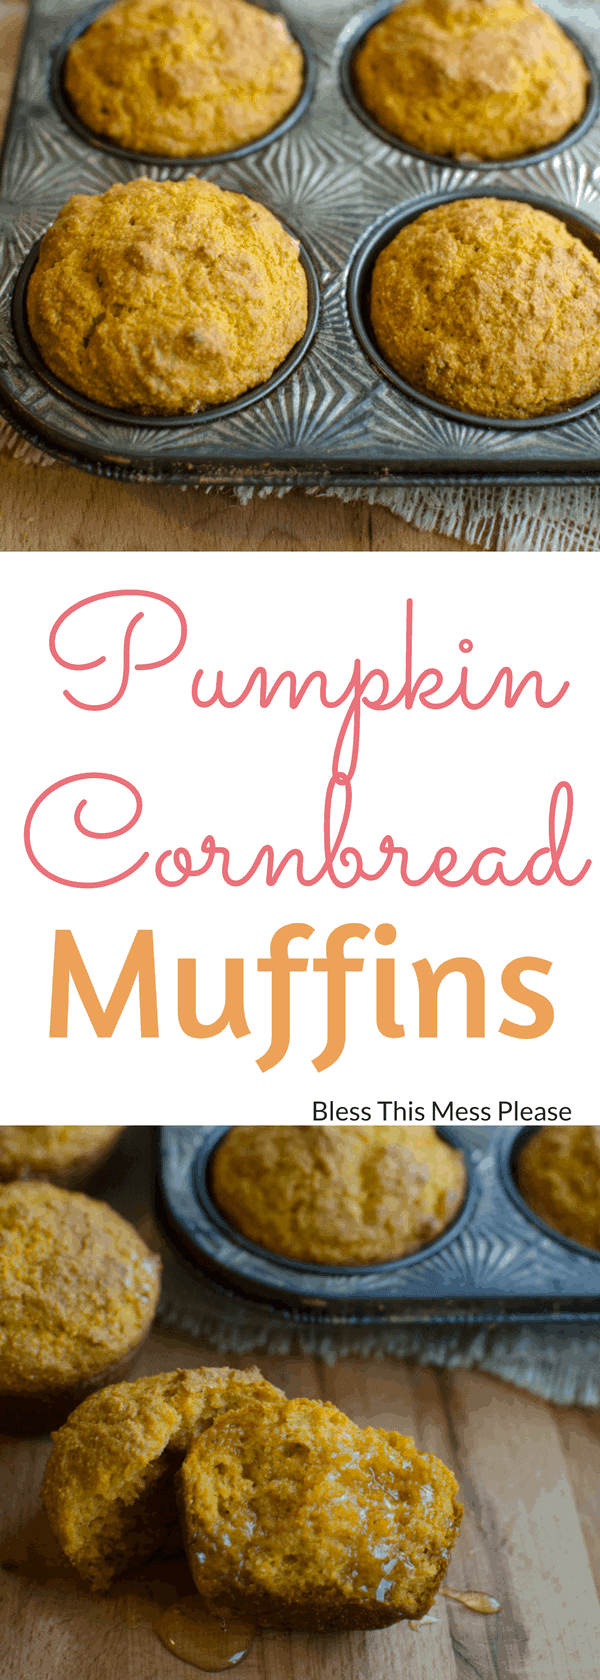 Two Images of Pumpkin Cornbread Muffins